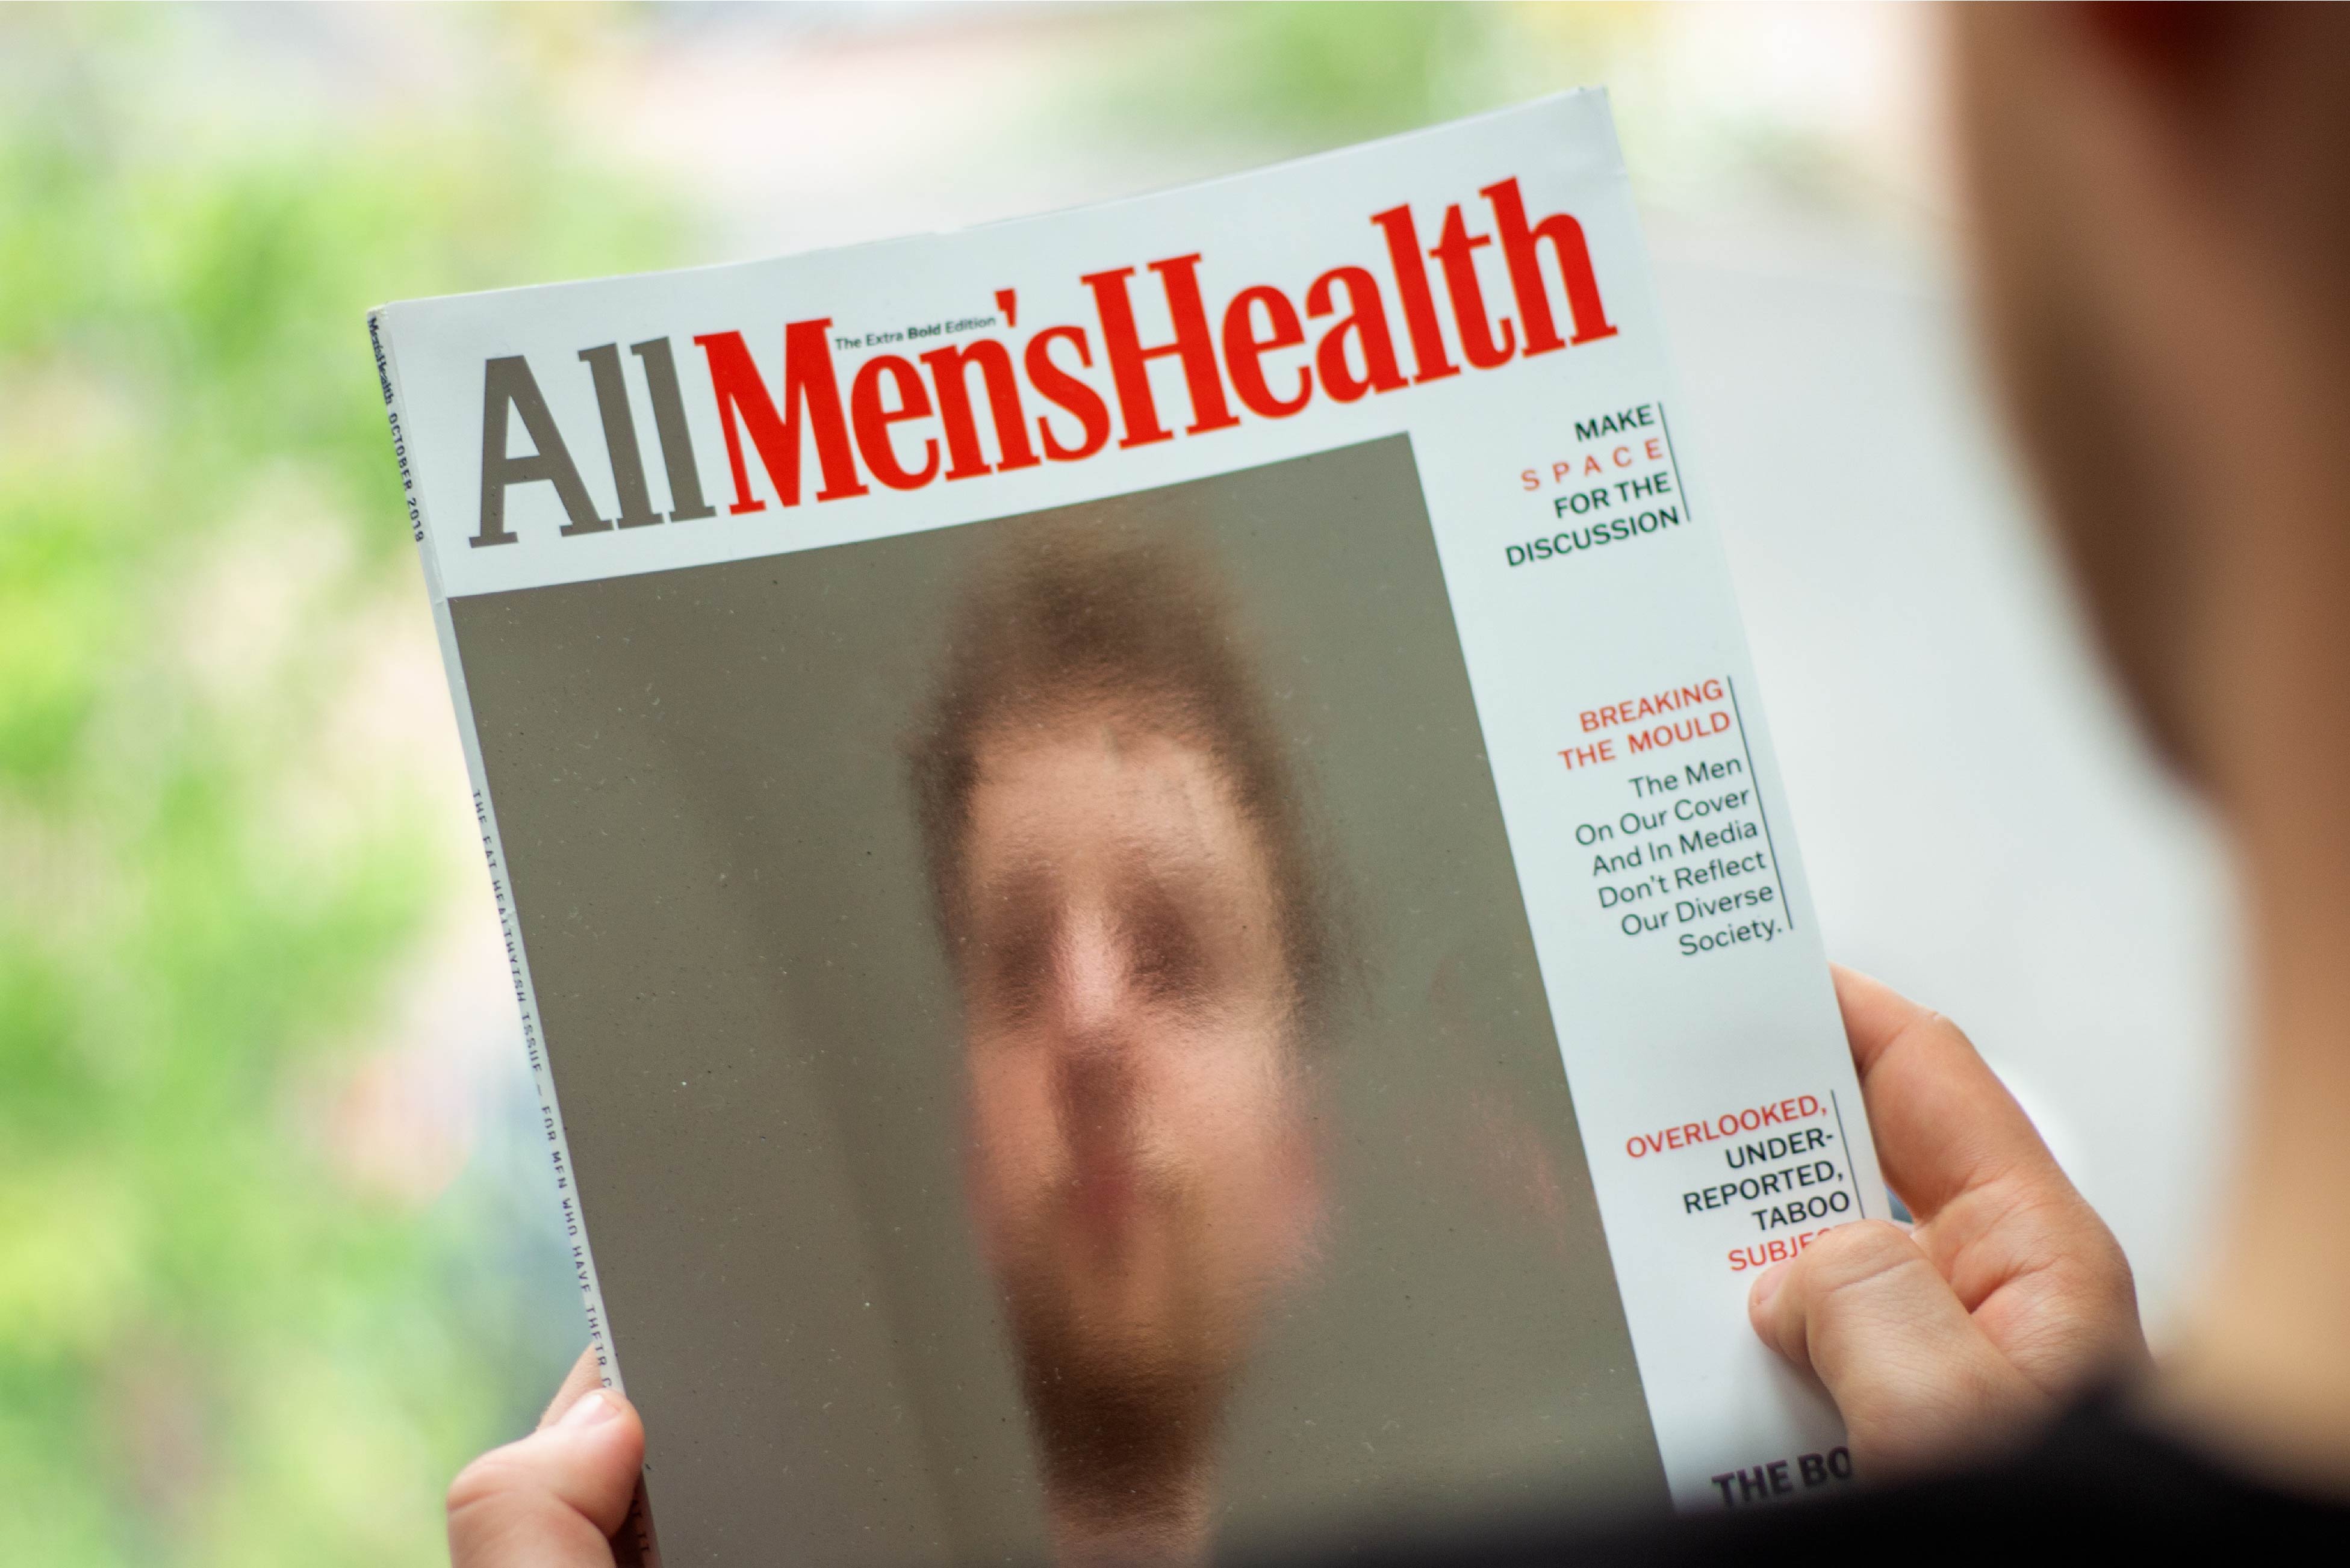 Graphic Communication work by Dominik Sobolewski showing a design for good campaign created in partnership with Men's Health. The magazine masthead says 'All Mens' Health' with an blurred image of a man on the front cover.